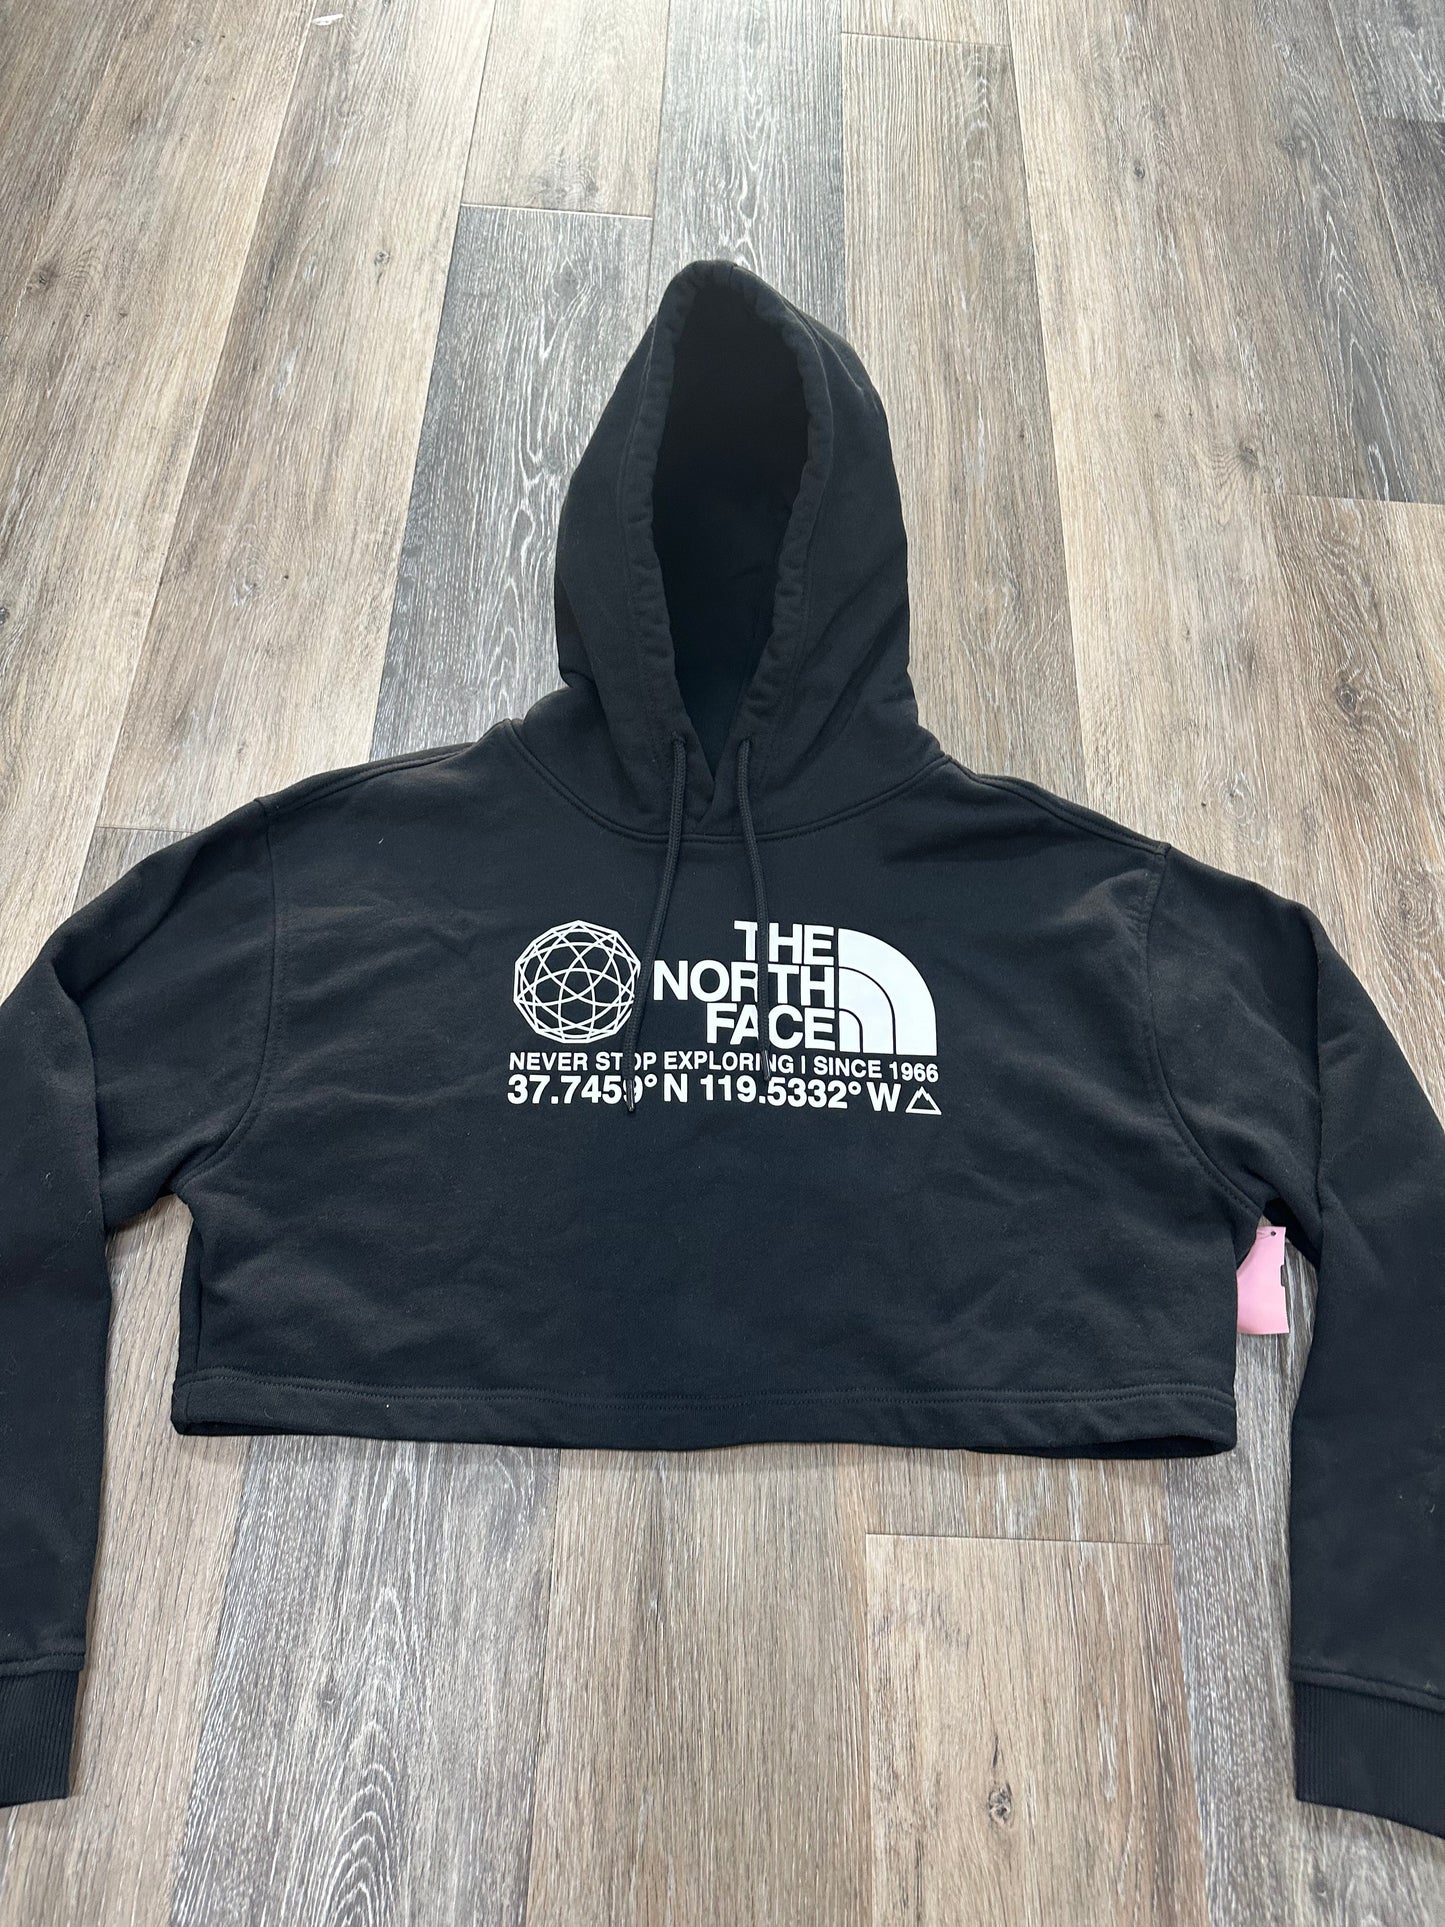 Sweatshirt Hoodie By North Face  Size: L